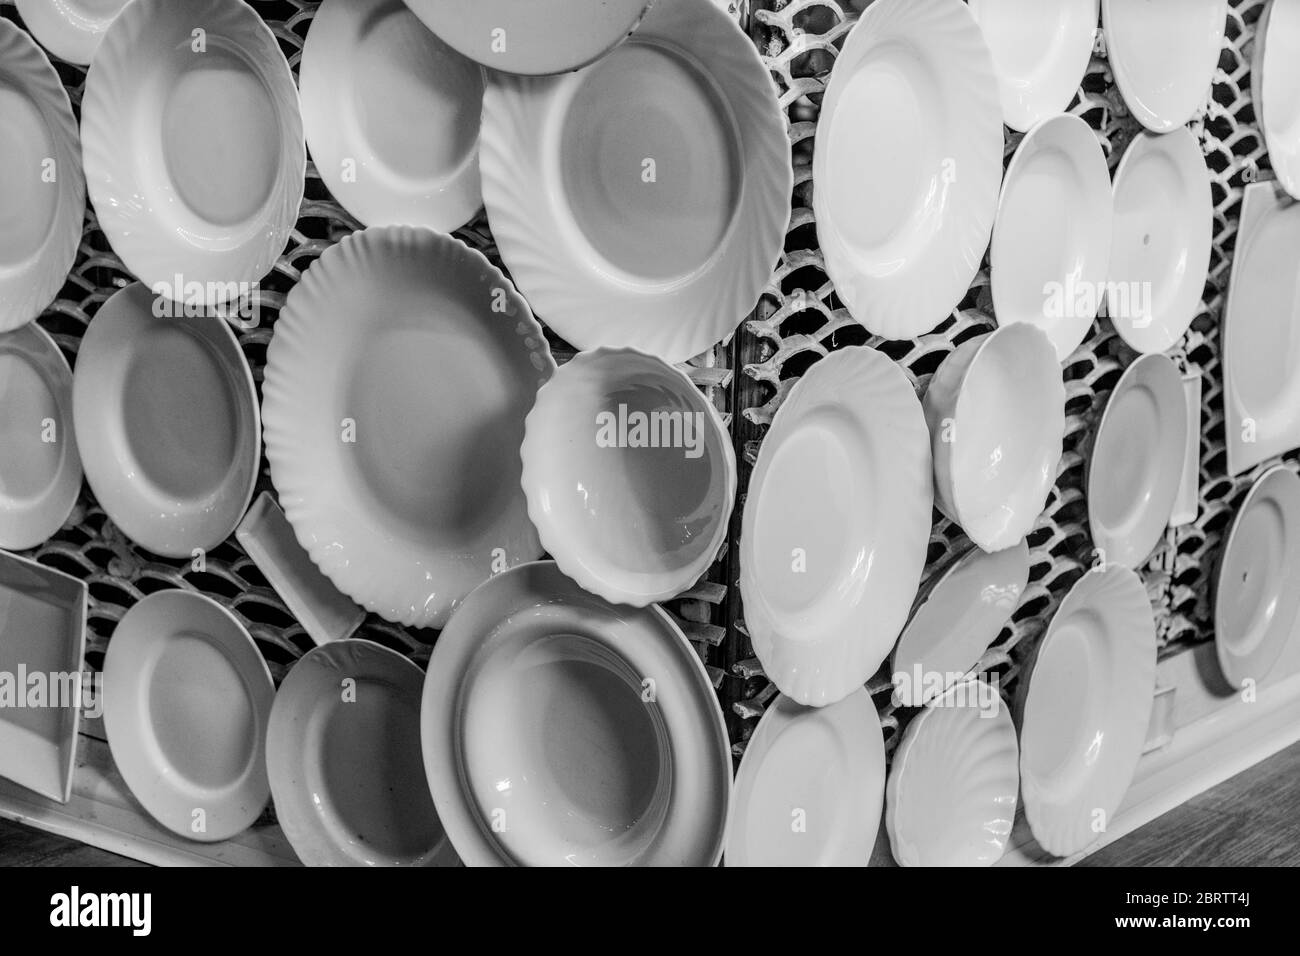 Black and white photography of white crockery plates and dishes are displayed on white lattice wall. Dinnerware of different sizes Stock Photo